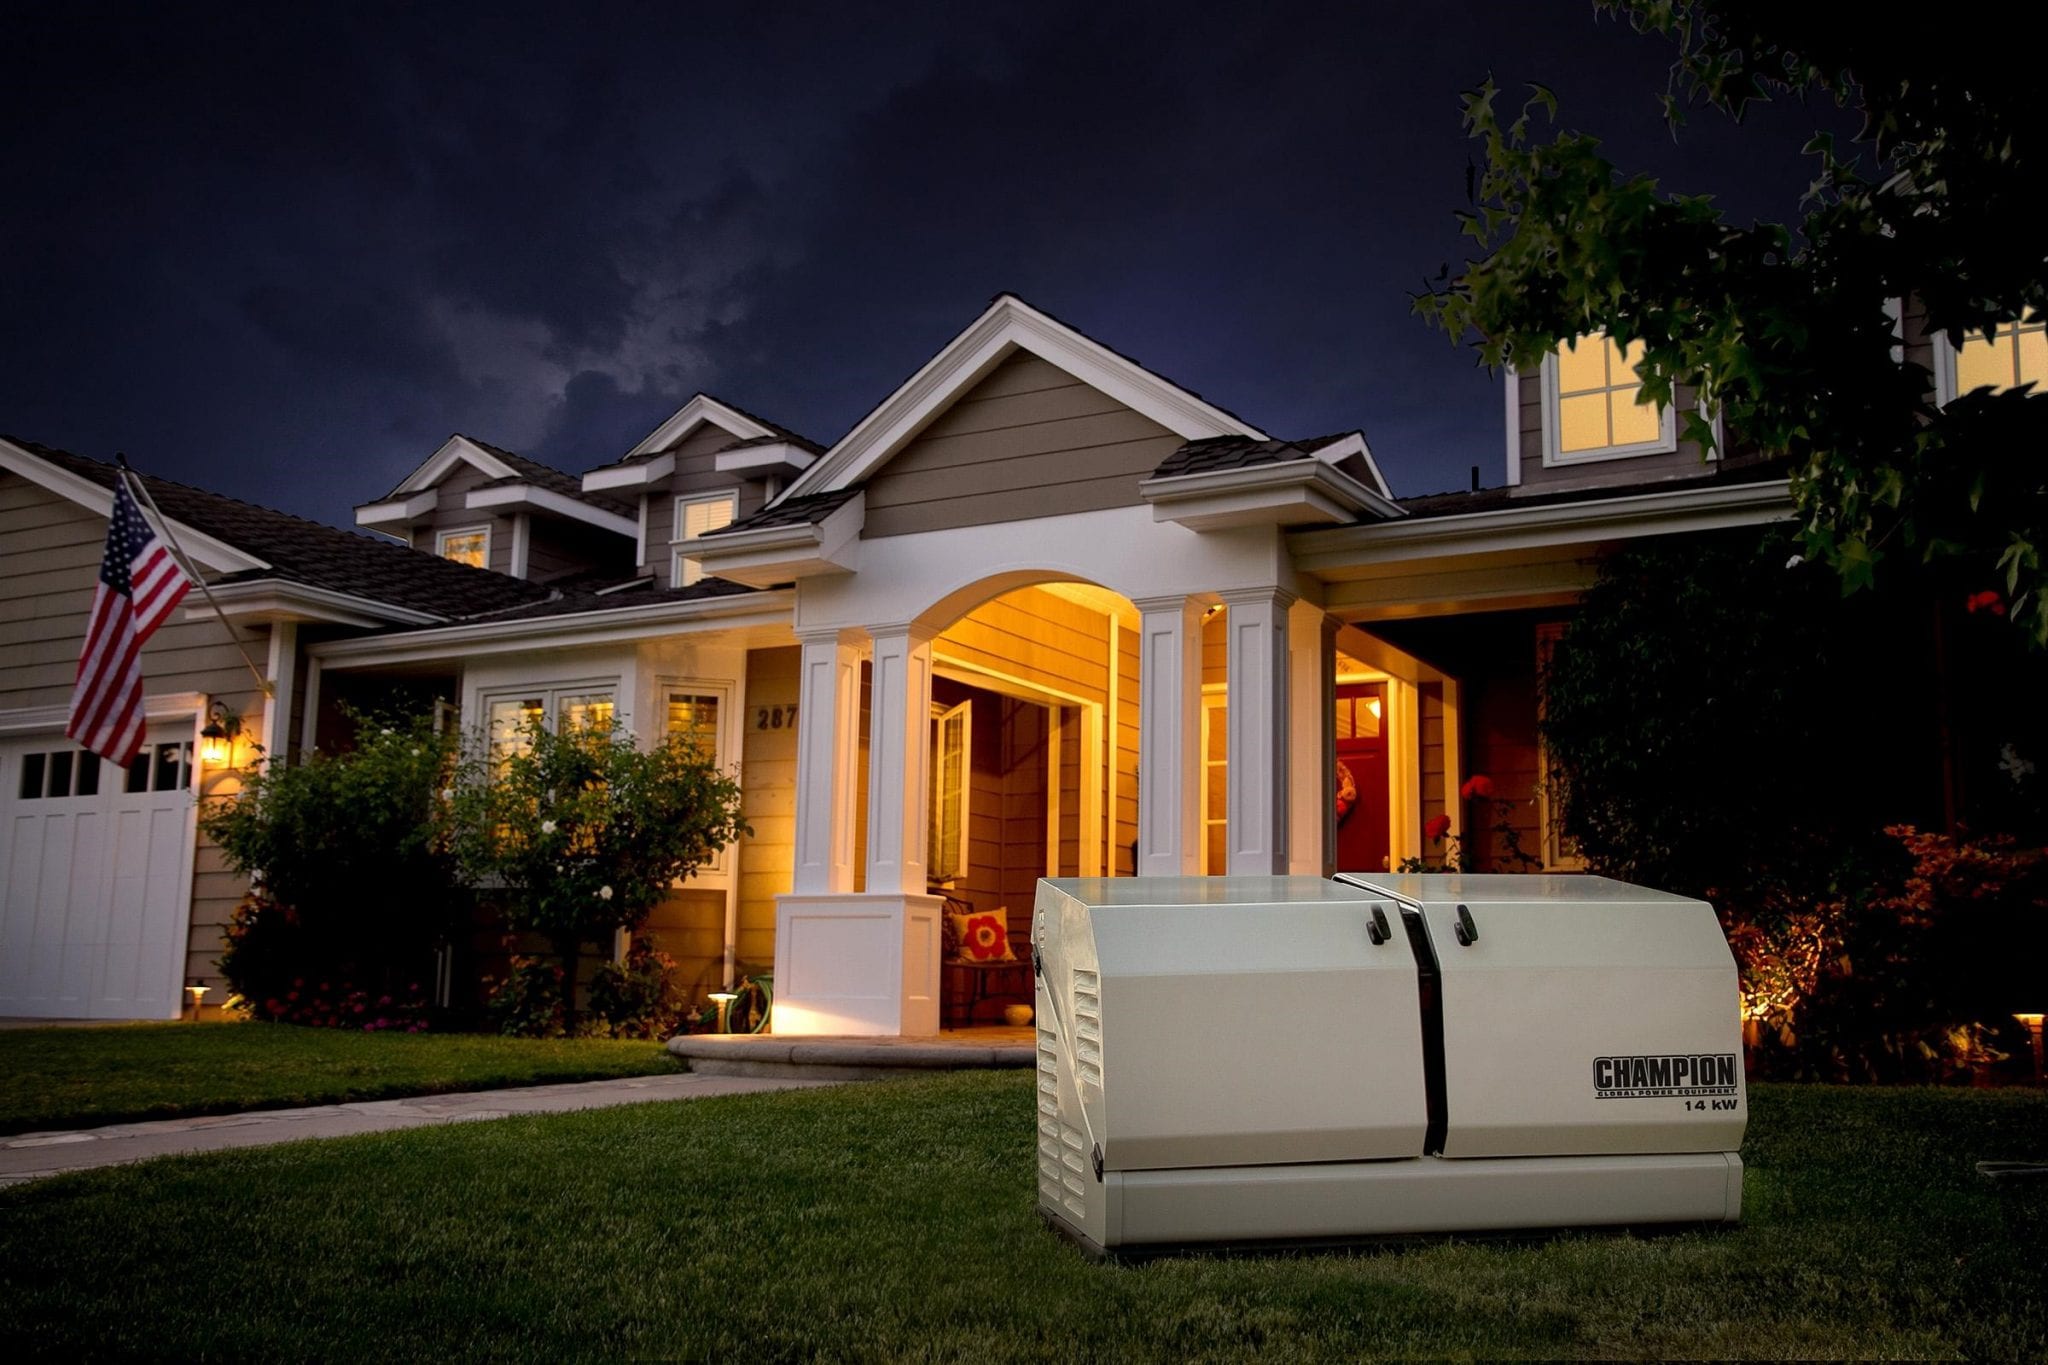 Champion residential generator in the foreground of a private, suburban home at night.